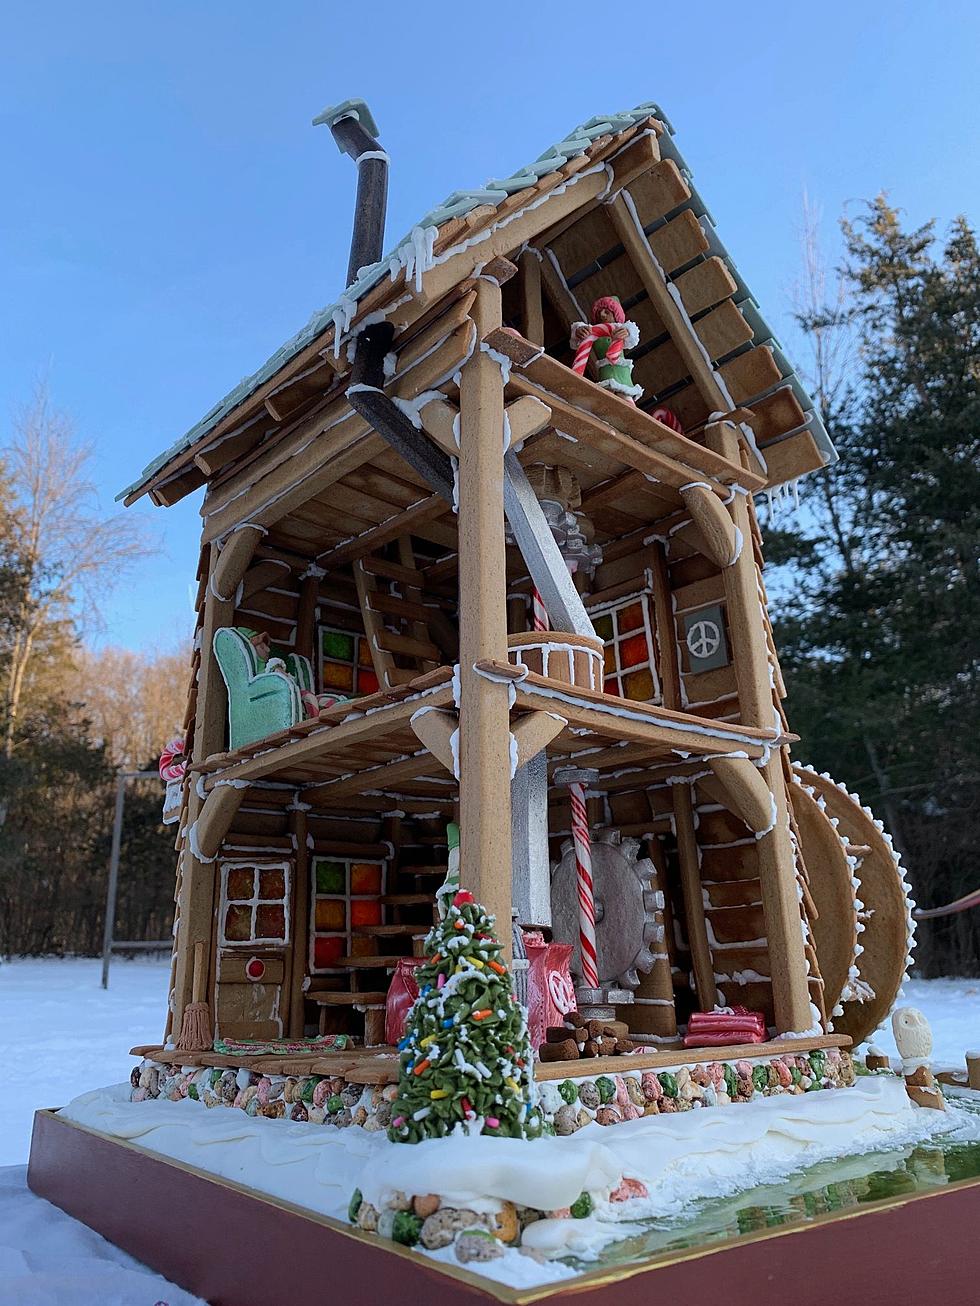 New Paltz Man Shows Off His Gingerbread House on TV’s Food Network